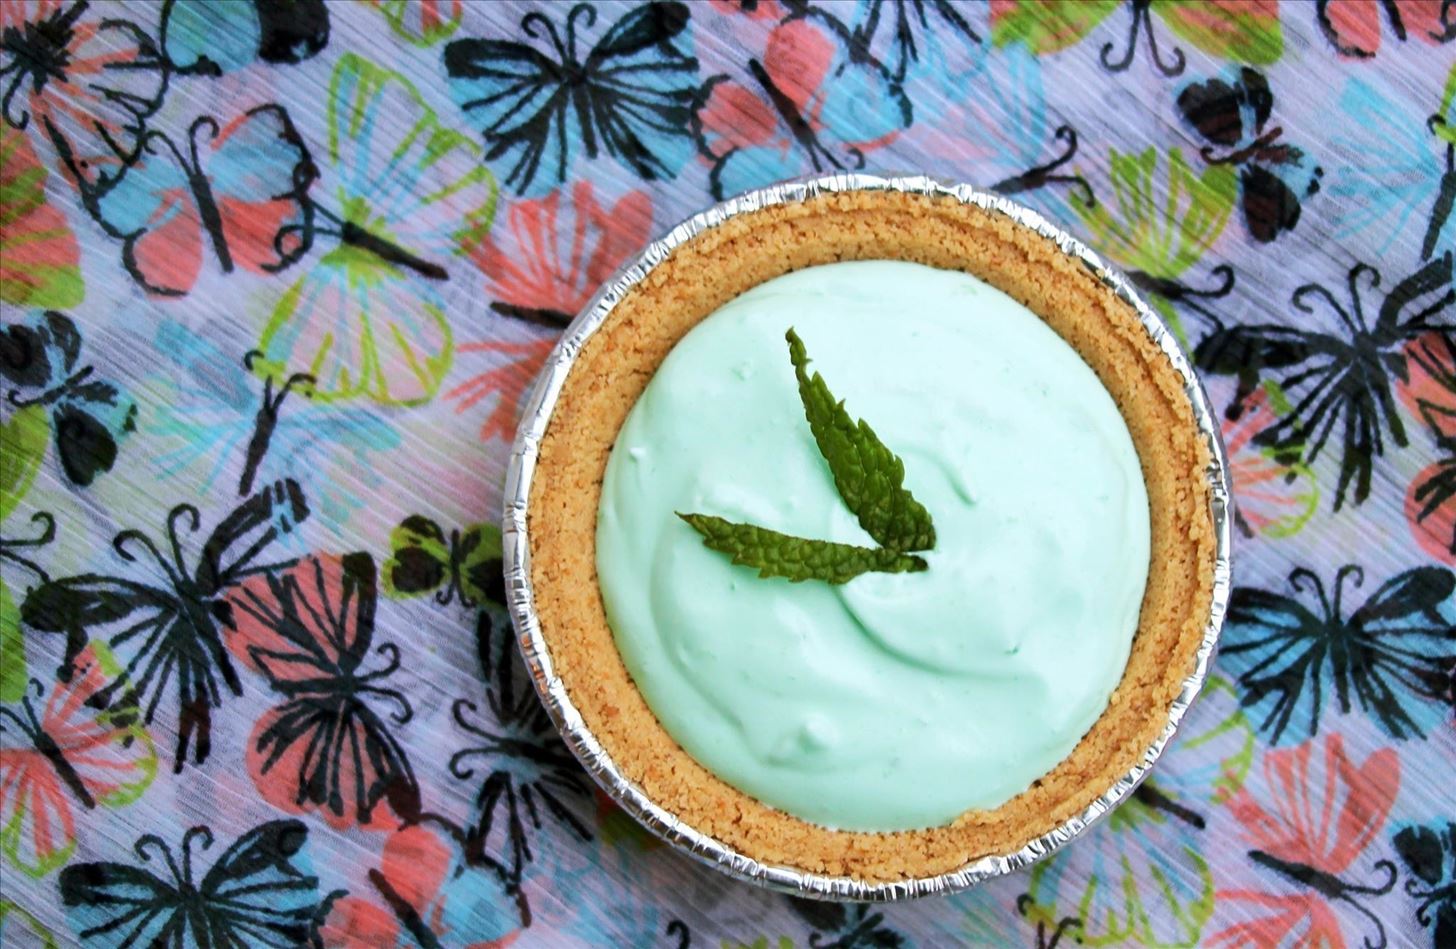 How to Make Spiked Grasshopper Pies in Your Microwave